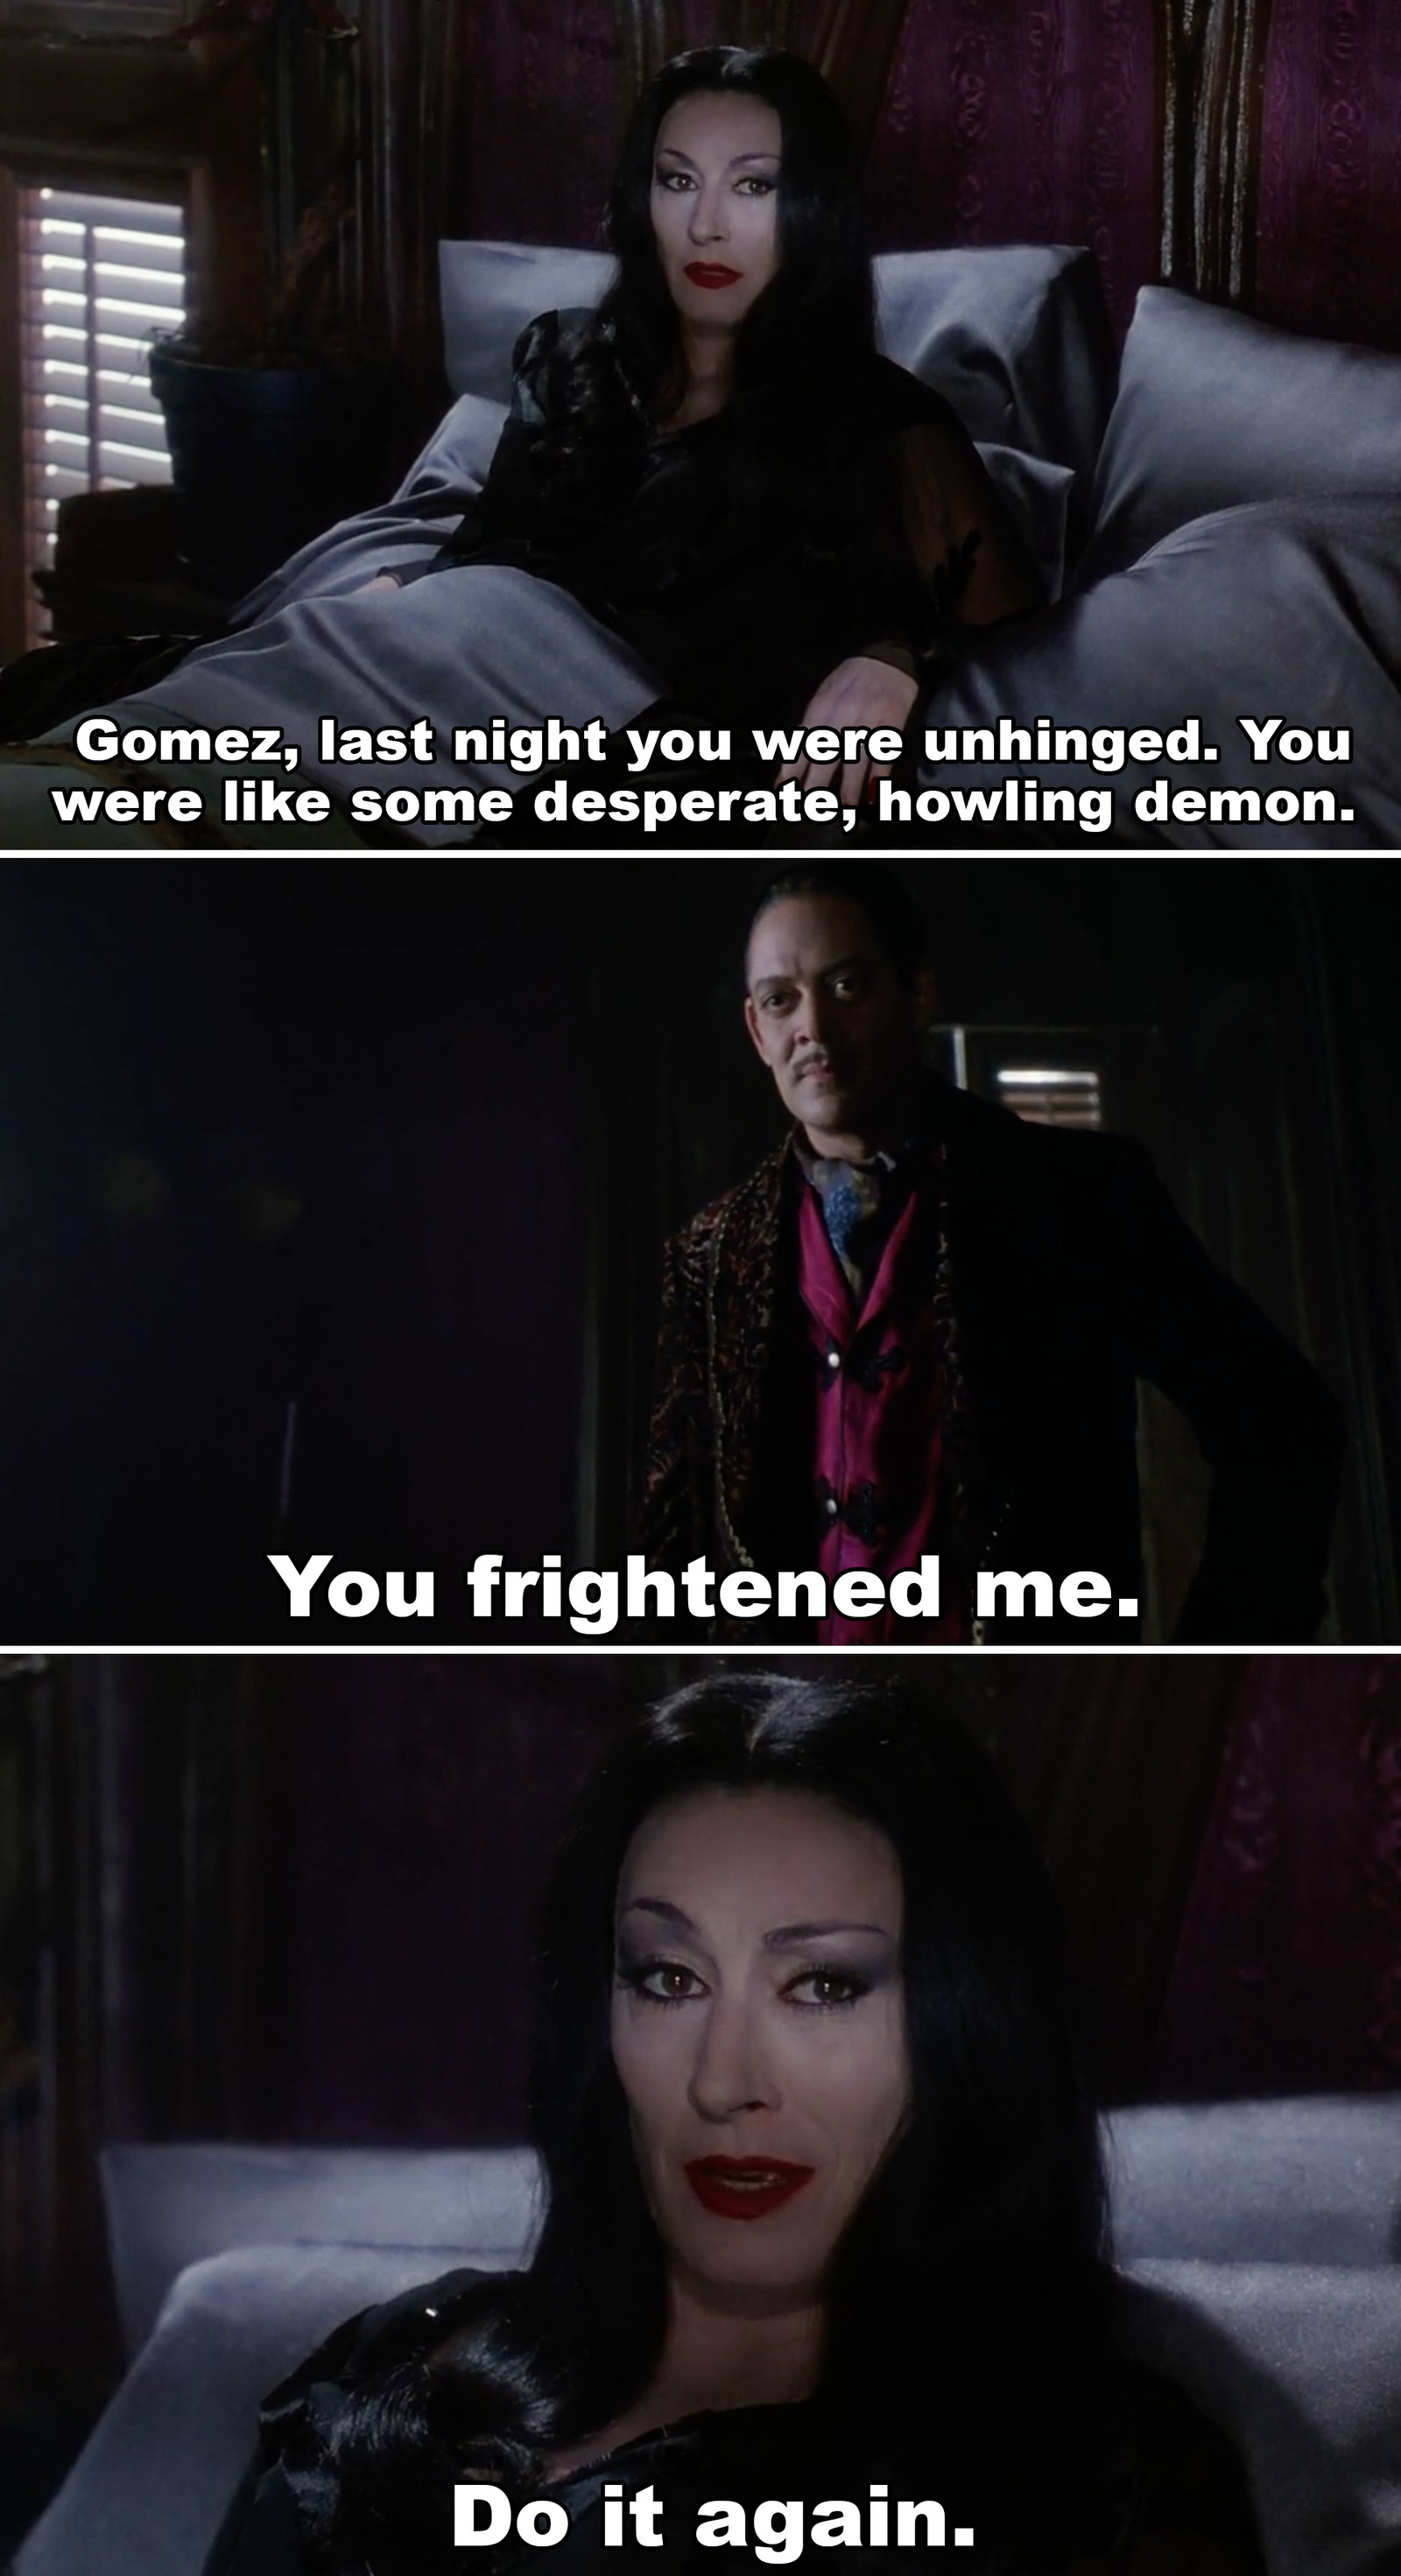 gomez and morticia - Gomez, last night you were unhinged. You were some desperate, howling demon. You frightened me. Do it again.